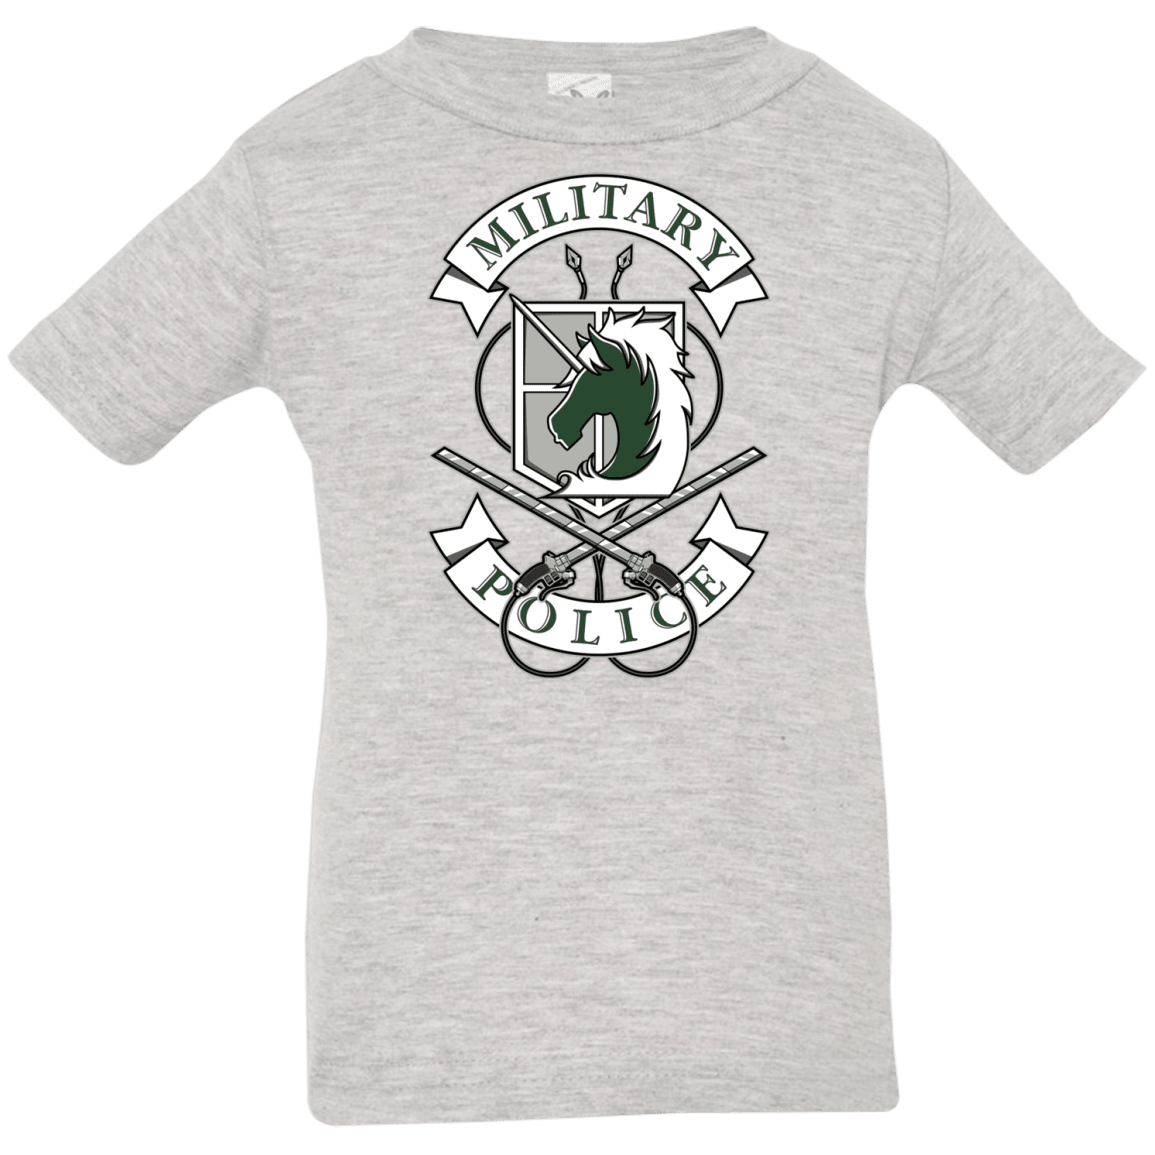 T-Shirts Heather Grey / 6 Months AoT Military Police Infant Premium T-Shirt